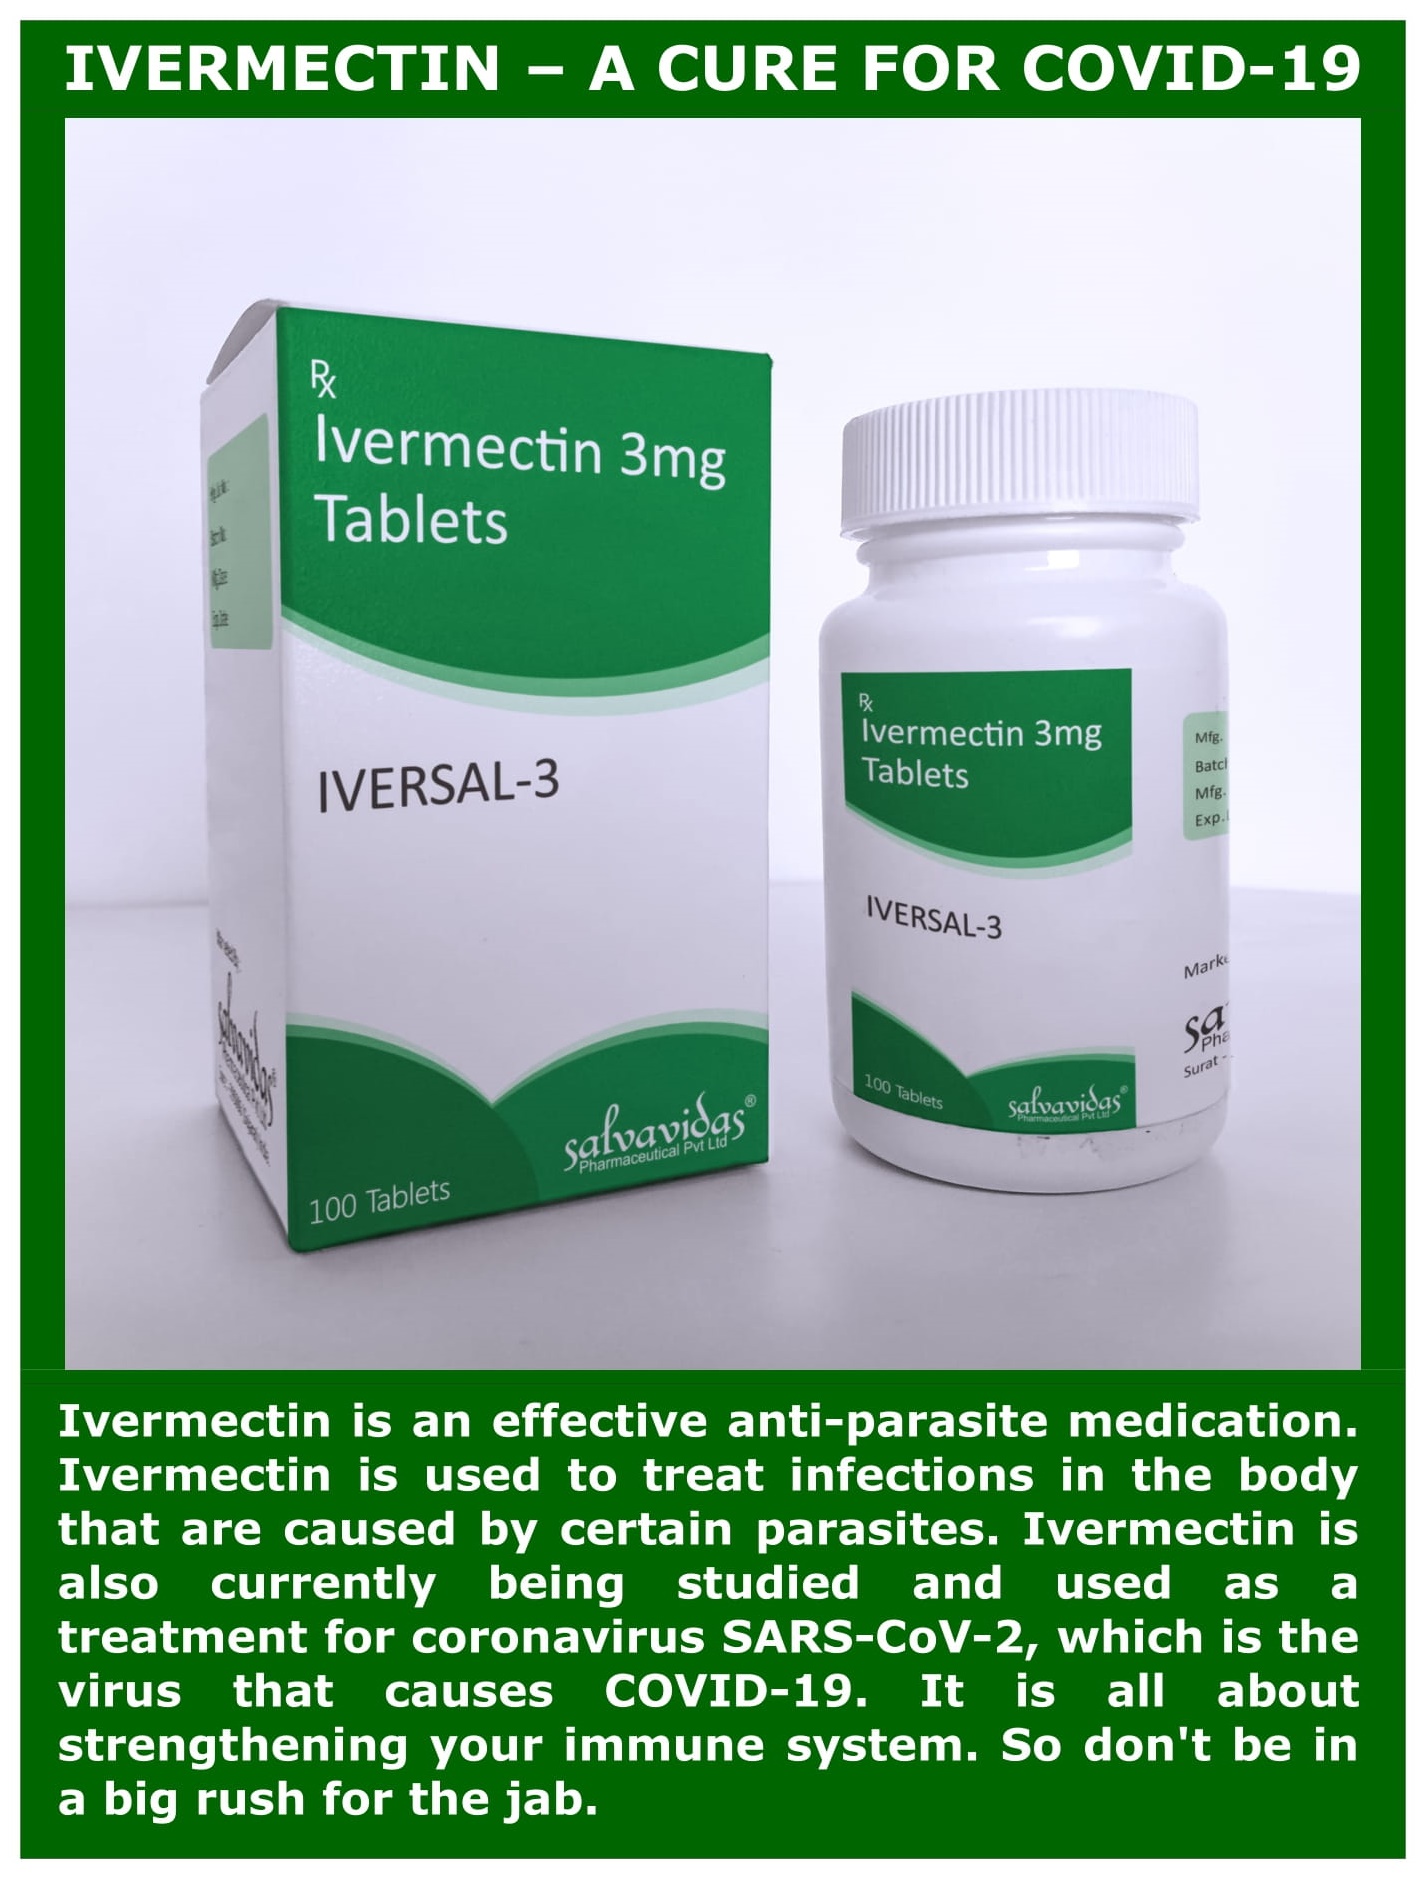 Ivermectin for Covid-19